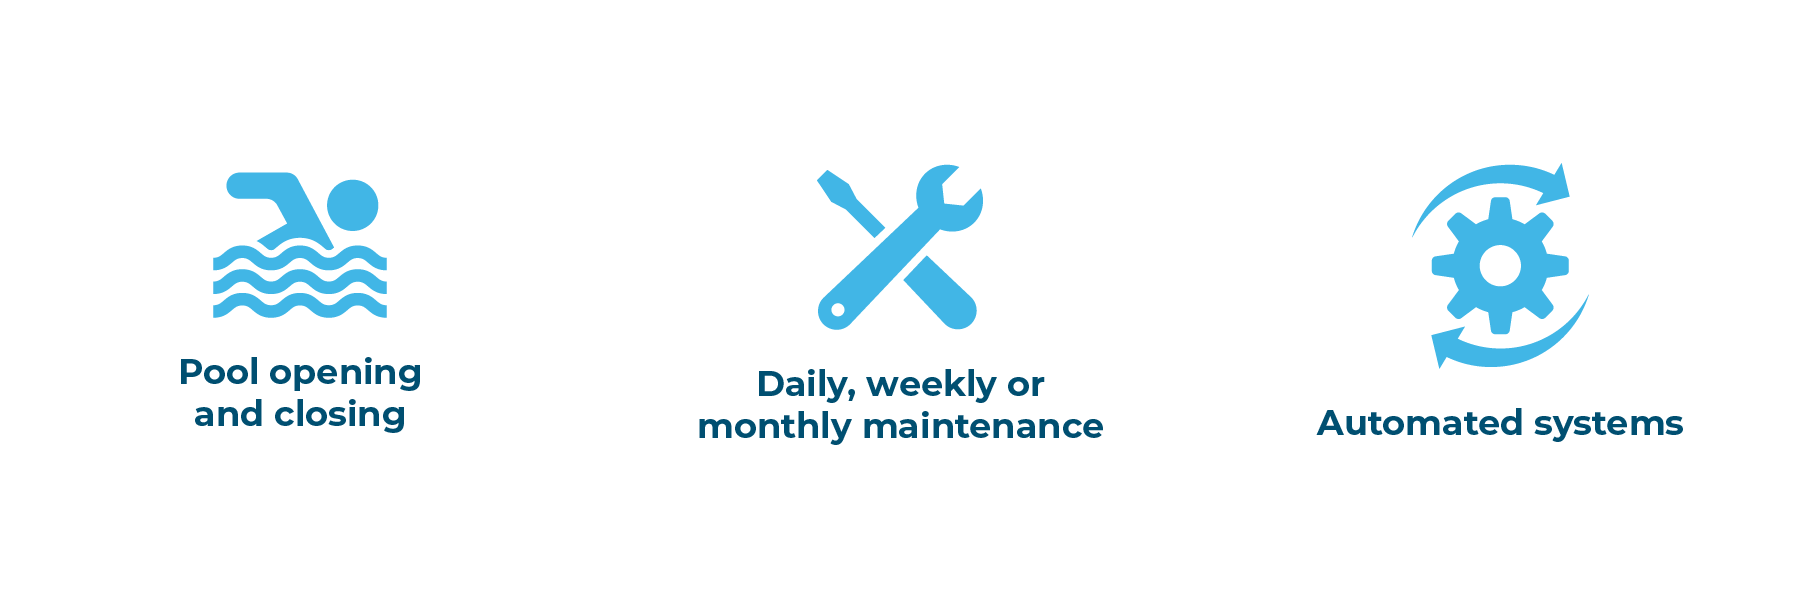 Pool opening and closing, daily, weekly or monthly maintenance, automated systems